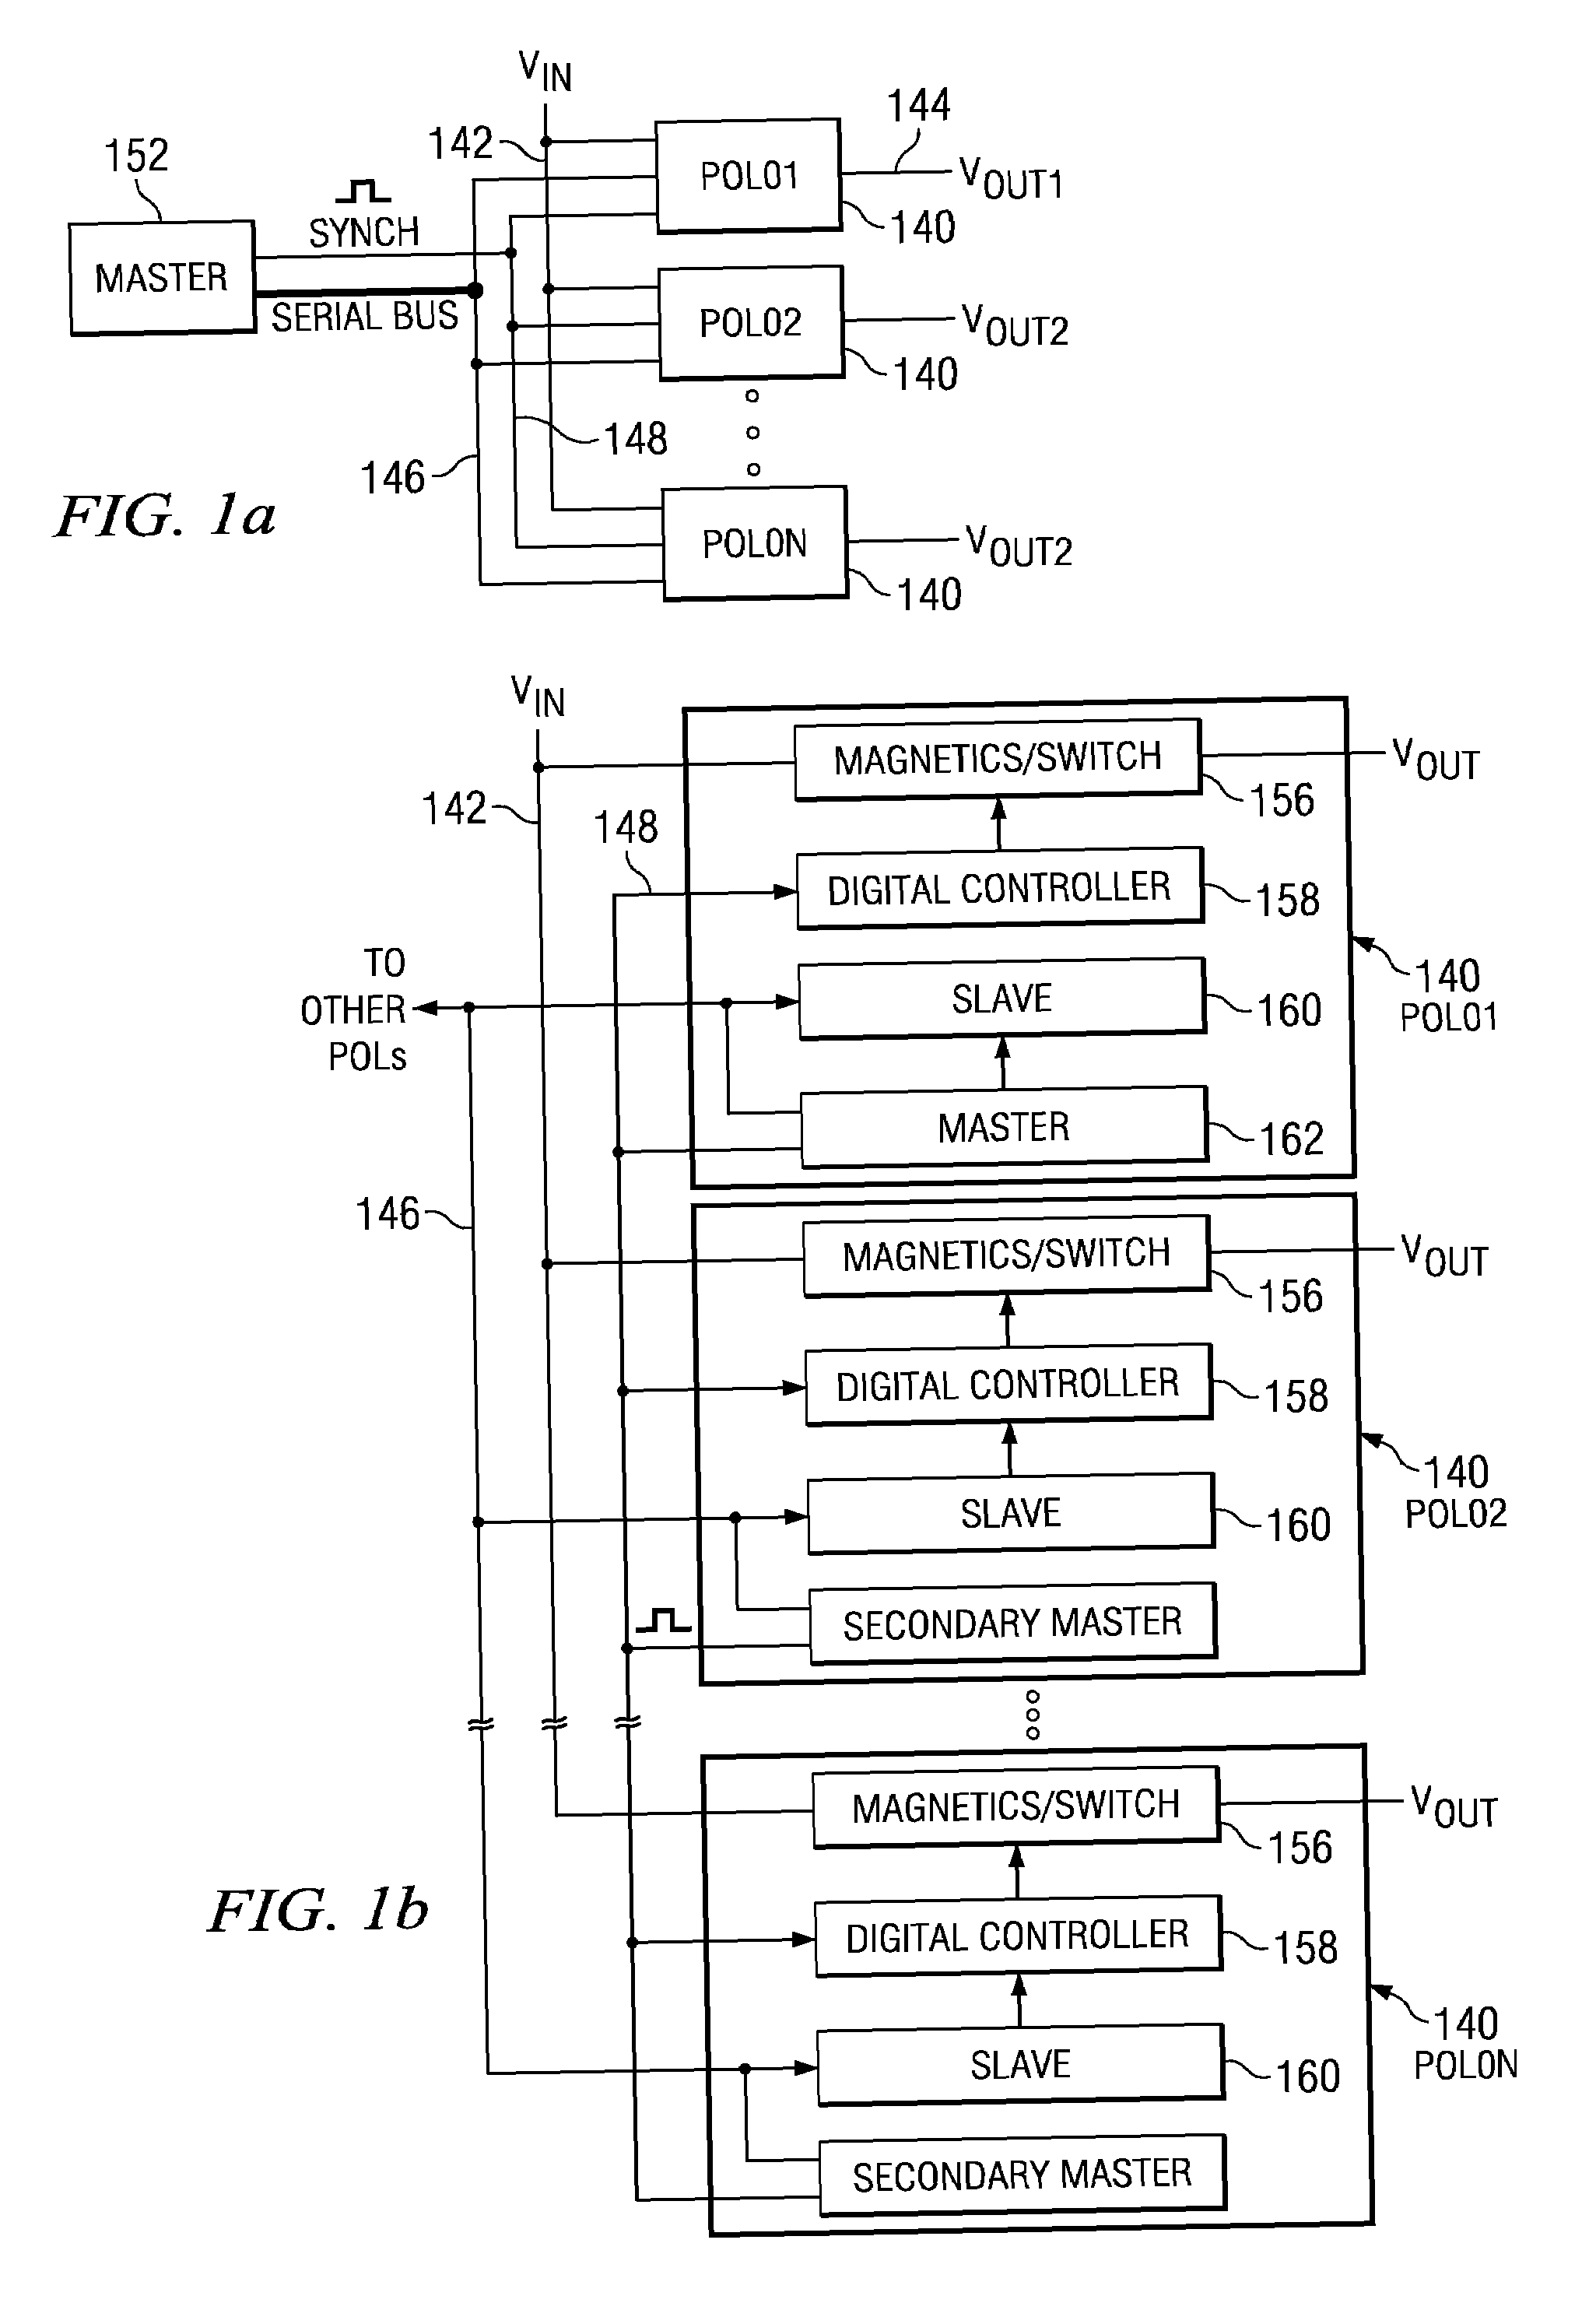 Distributed power supply system with separate SYNC control for controlling remote digital DC/DC converters